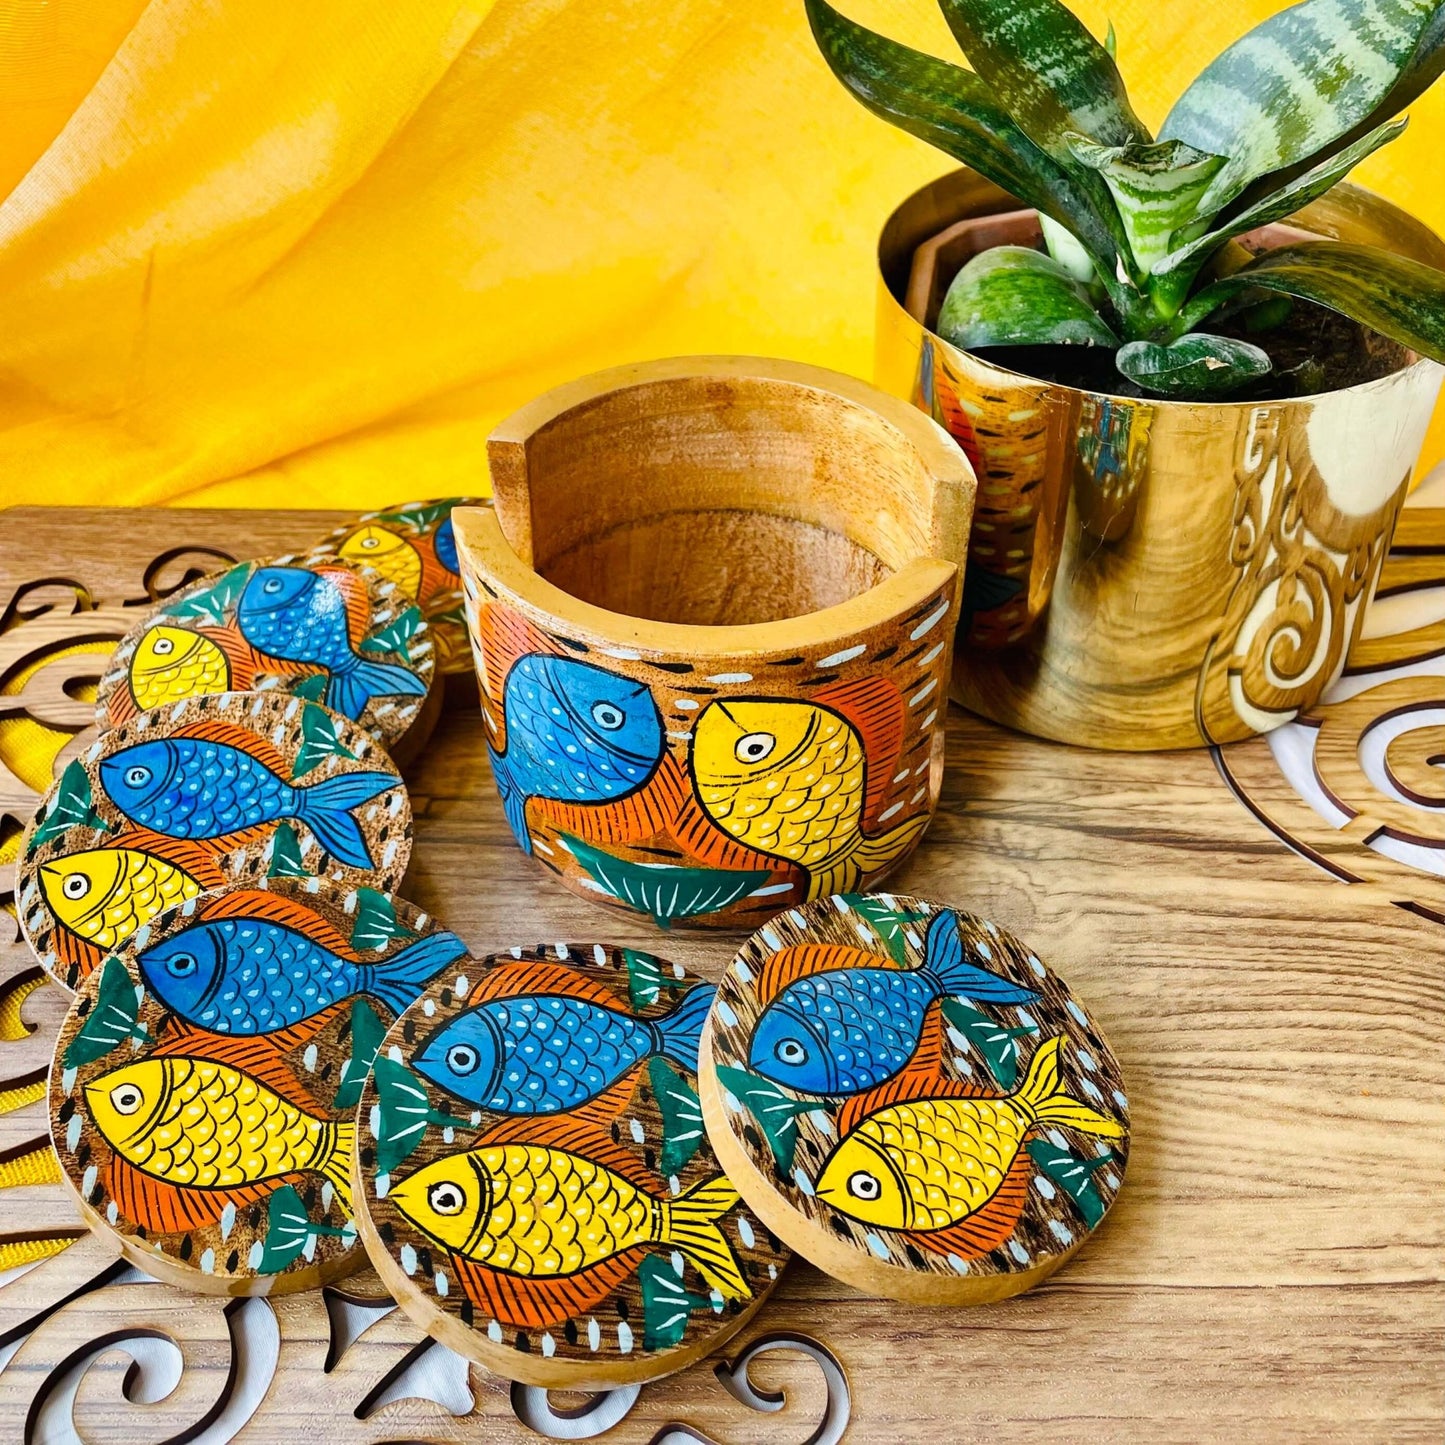 An empty coaster holder placed in front of a plant pot along with 6 round wooden coasters, all hand painted with blue and yellow fish motifs.